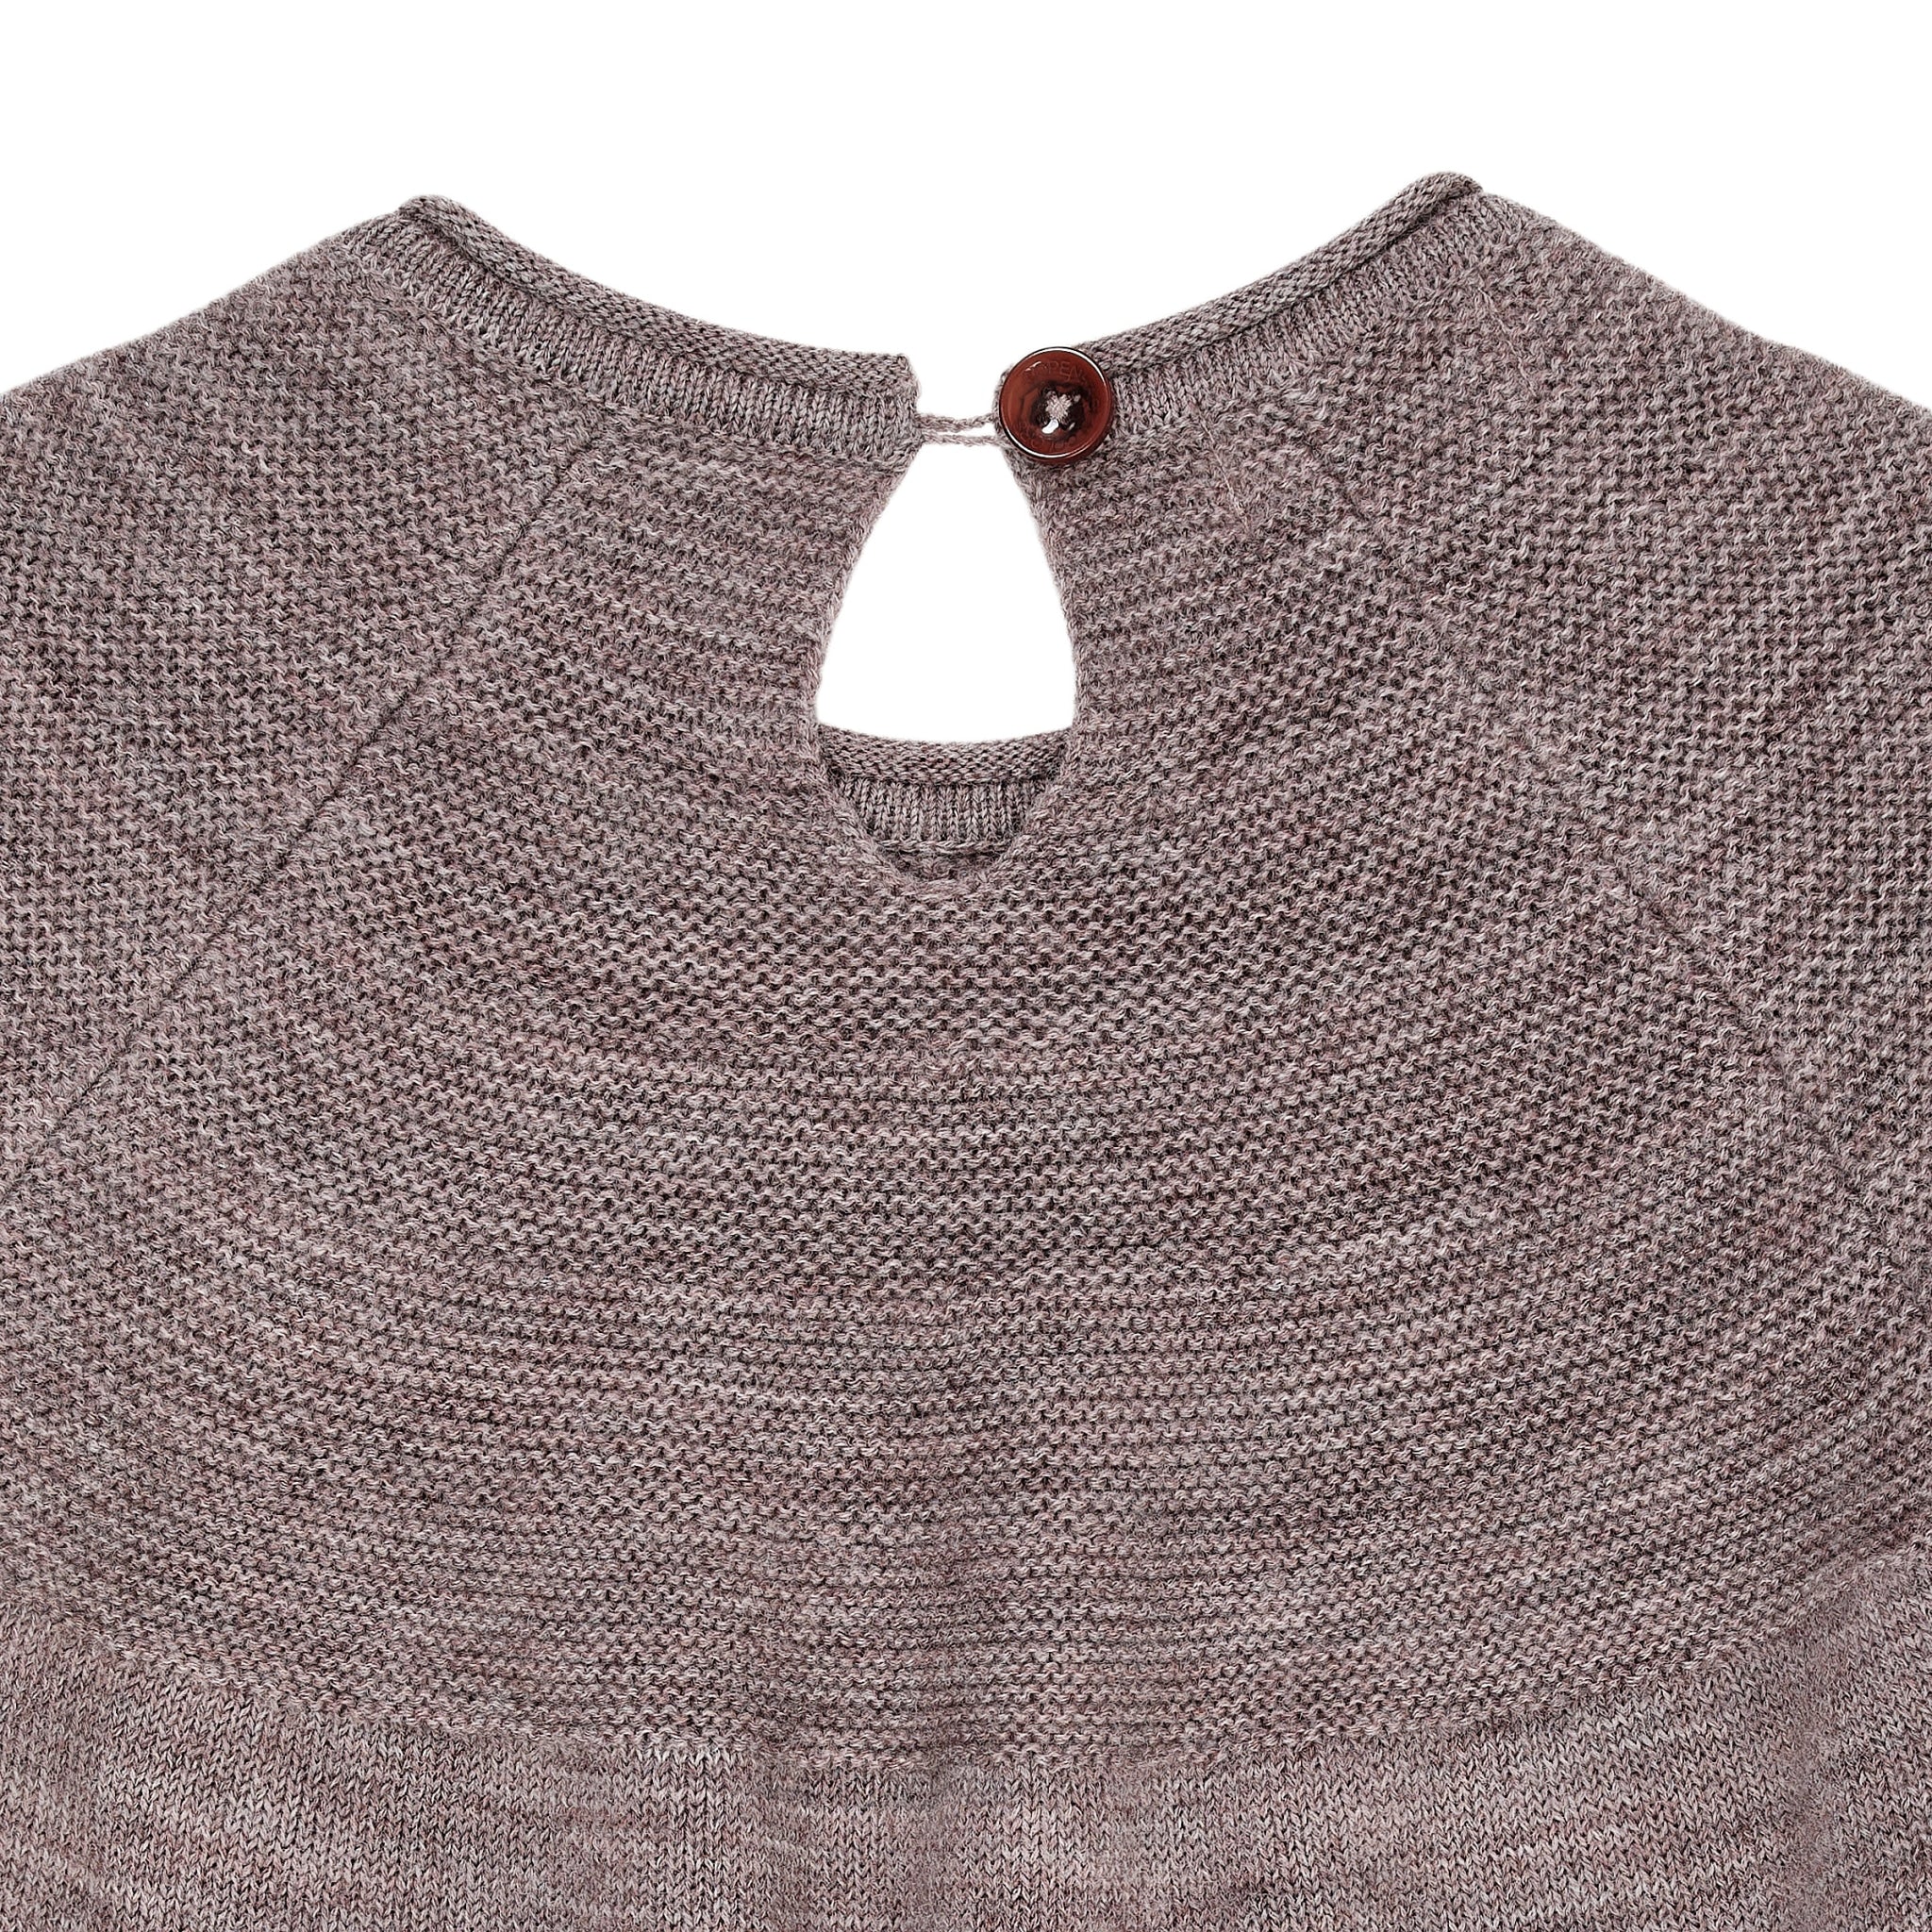 MERINO KNIT BLOUSE WITH FRILL - NATURAL MELANGE